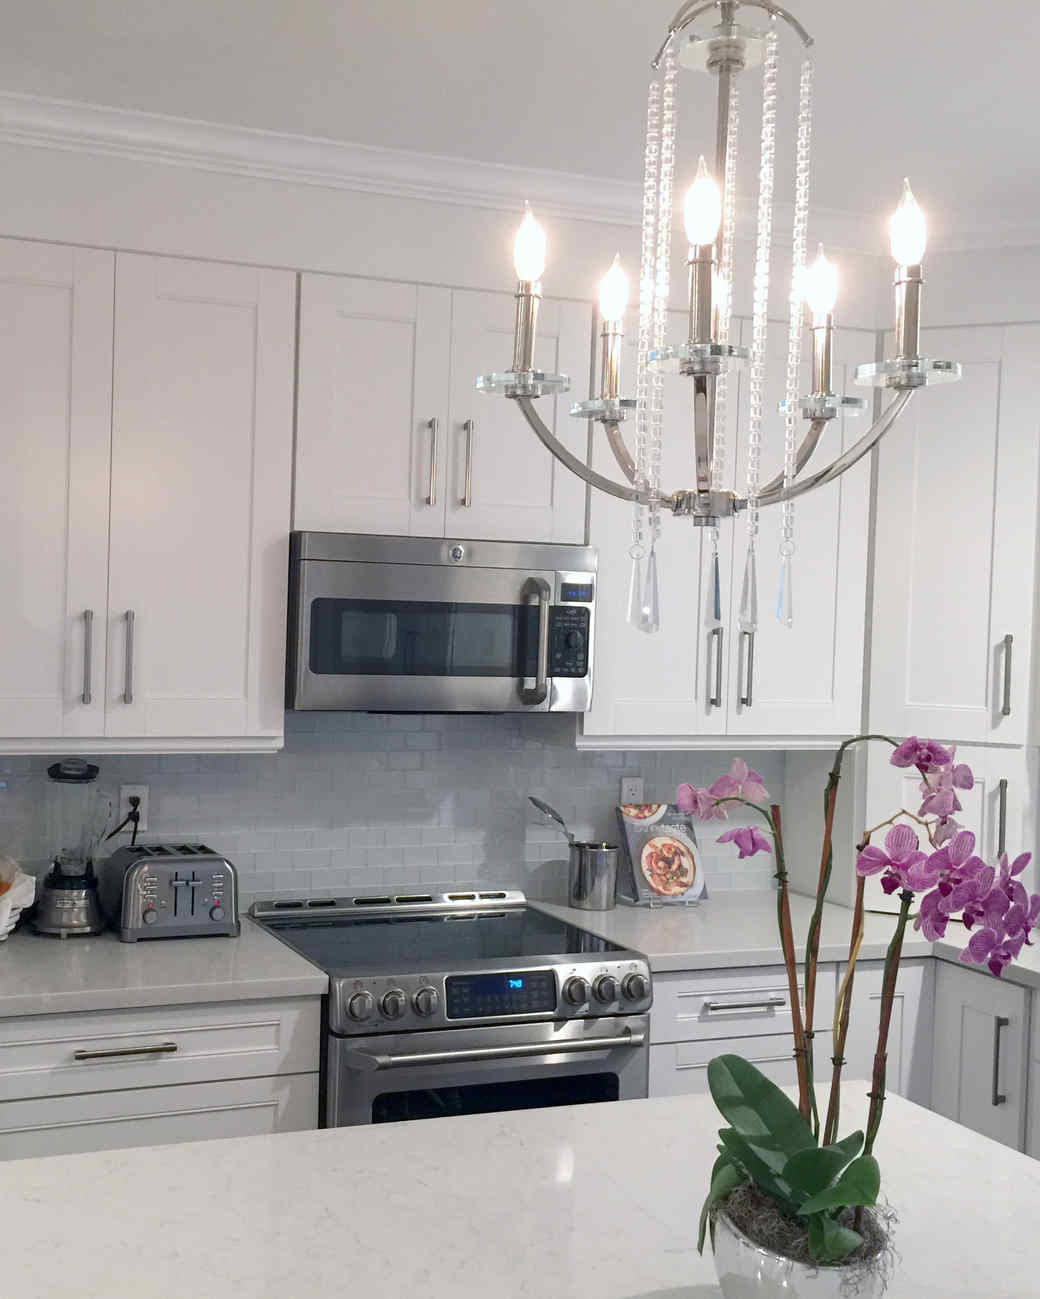 Bright Kitchen Lighting
 6 Bright Kitchen Lighting Ideas See How New Fixtures